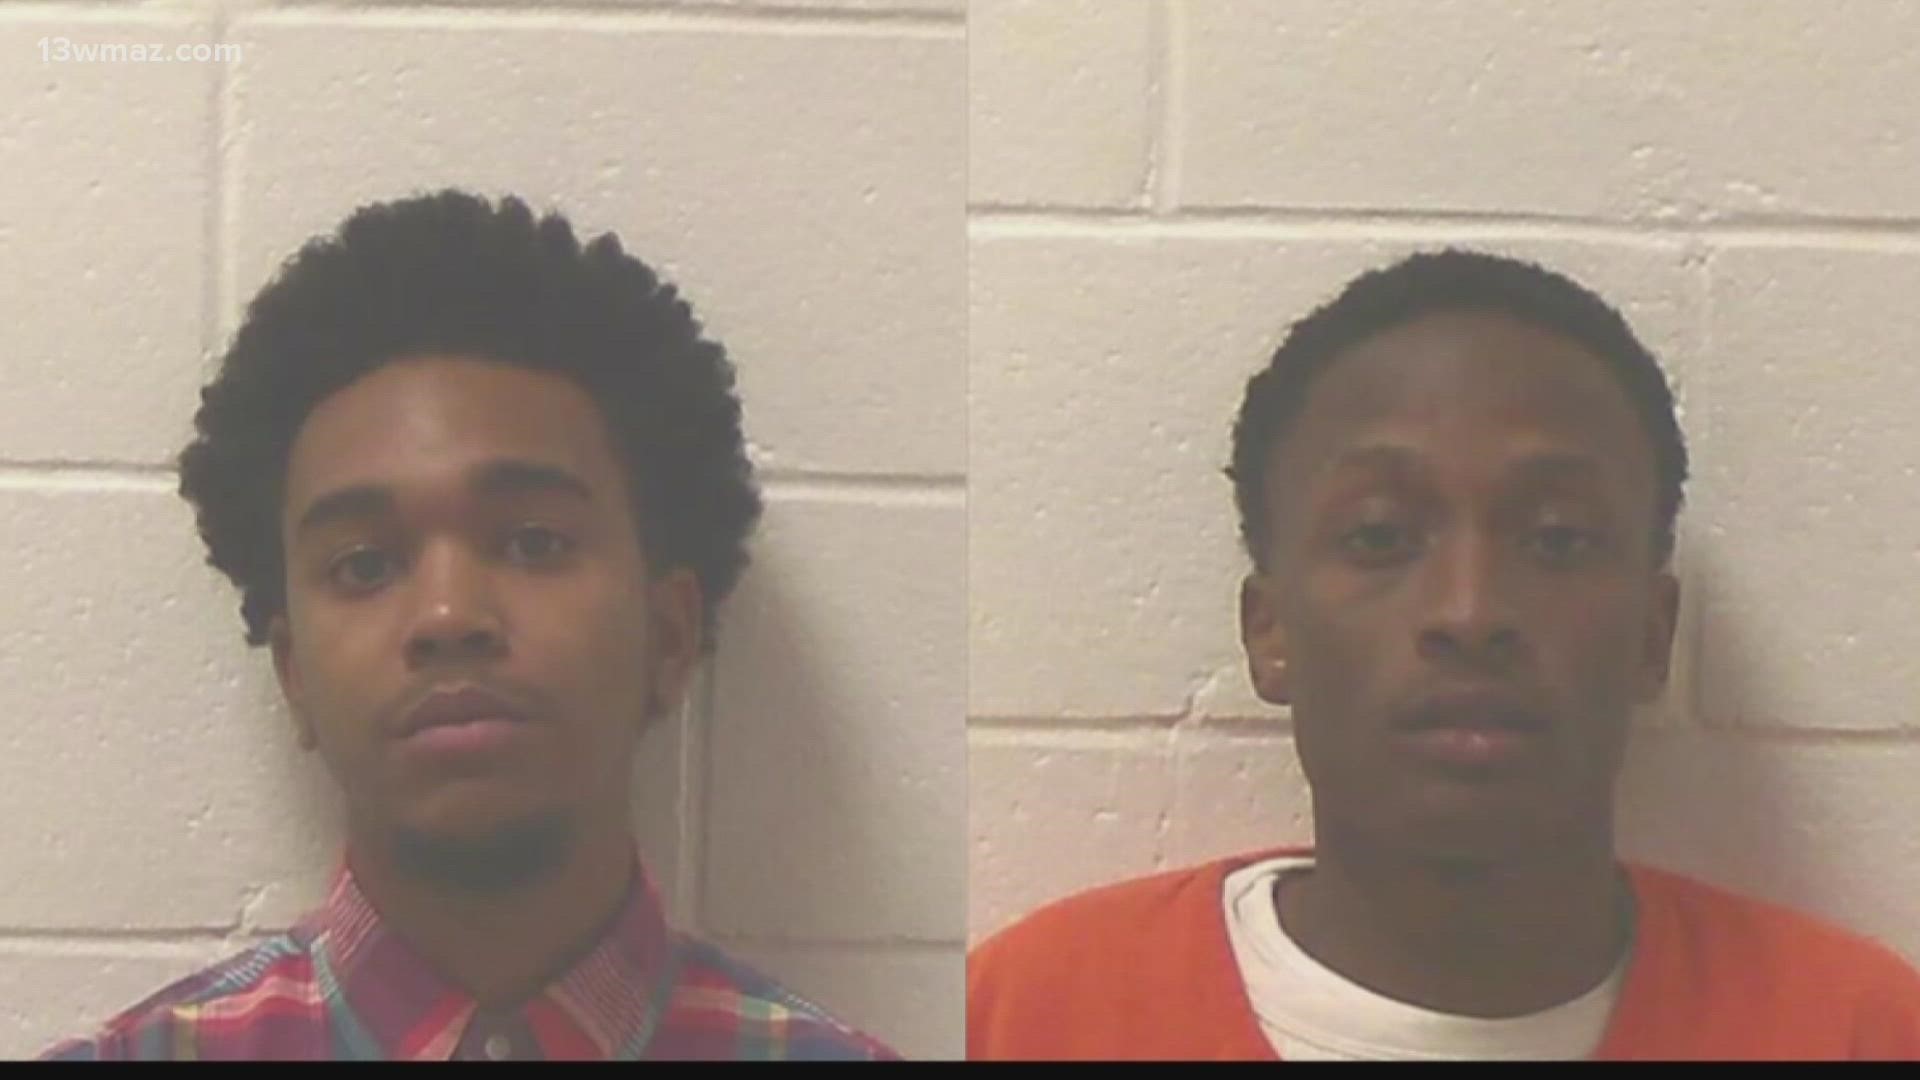 Cameron Banks, Justerrious Canty, and Jaqualan Clark were convicted on all counts, nearly a dozen charges each, including murder and felony murder.